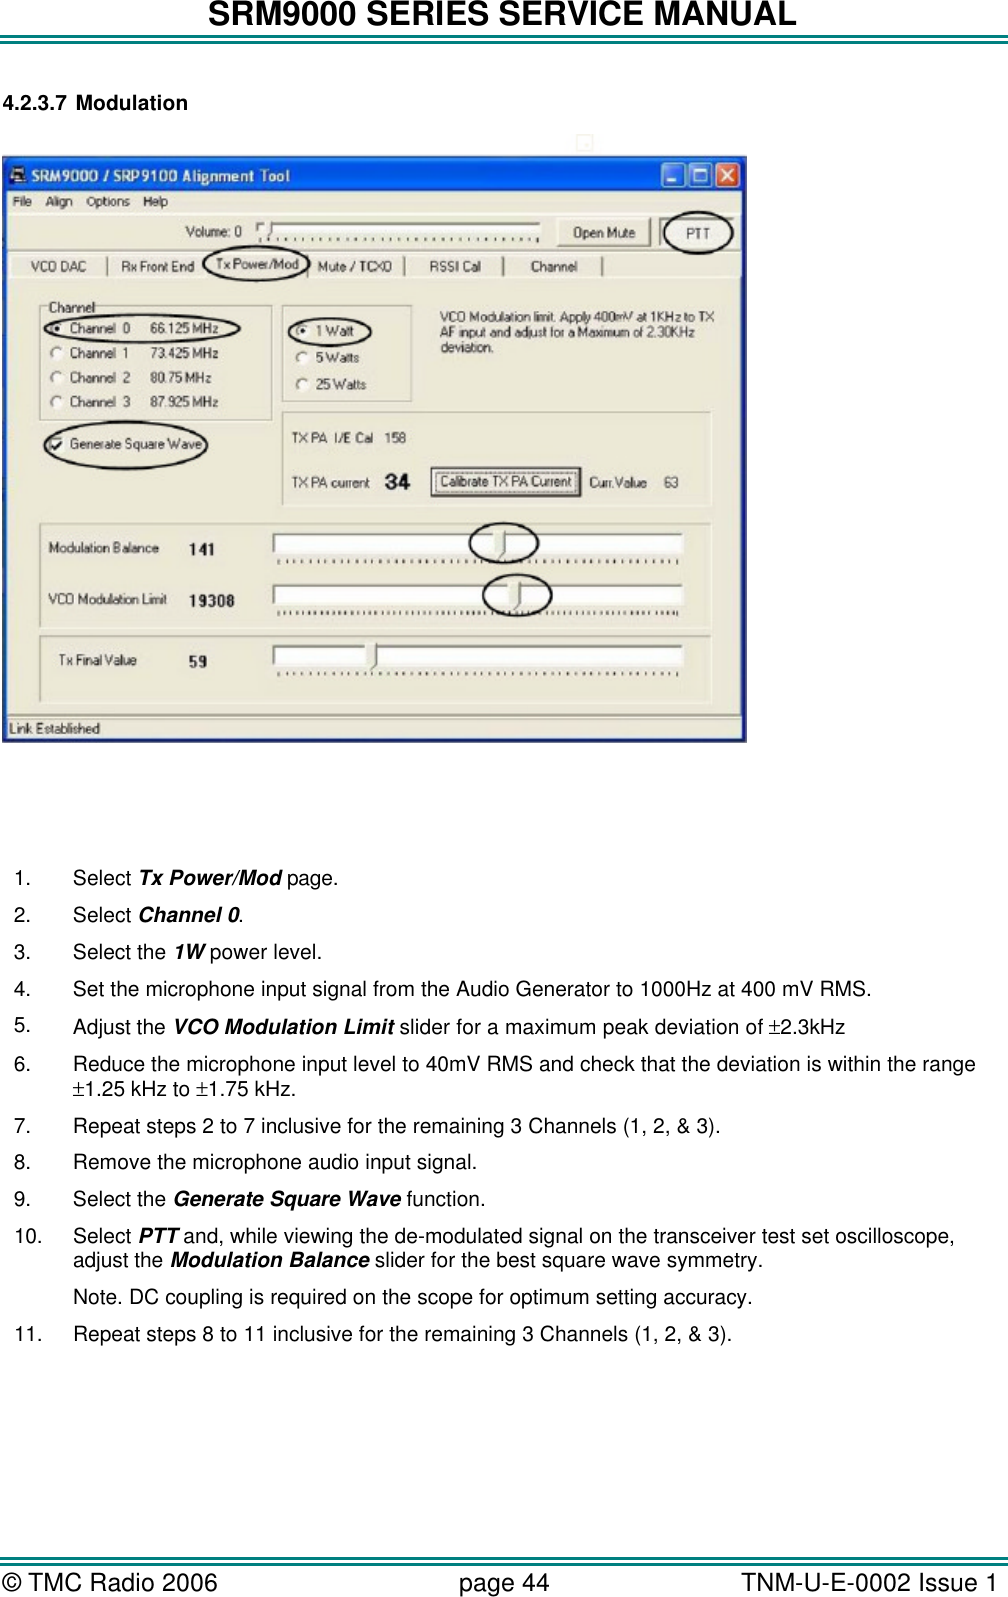 SRM9000 SERIES SERVICE MANUAL © TMC Radio 2006 page 44   TNM-U-E-0002 Issue 1  4.2.3.7 Modulation     1. Select Tx Power/Mod page. 2. Select Channel 0. 3. Select the 1W power level. 4. Set the microphone input signal from the Audio Generator to 1000Hz at 400 mV RMS. 5. Adjust the VCO Modulation Limit slider for a maximum peak deviation of ±2.3kHz  6. Reduce the microphone input level to 40mV RMS and check that the deviation is within the range ±1.25 kHz to ±1.75 kHz. 7. Repeat steps 2 to 7 inclusive for the remaining 3 Channels (1, 2, &amp; 3). 8. Remove the microphone audio input signal. 9. Select the Generate Square Wave function. 10. Select PTT and, while viewing the de-modulated signal on the transceiver test set oscilloscope, adjust the Modulation Balance slider for the best square wave symmetry. Note. DC coupling is required on the scope for optimum setting accuracy. 11. Repeat steps 8 to 11 inclusive for the remaining 3 Channels (1, 2, &amp; 3).  